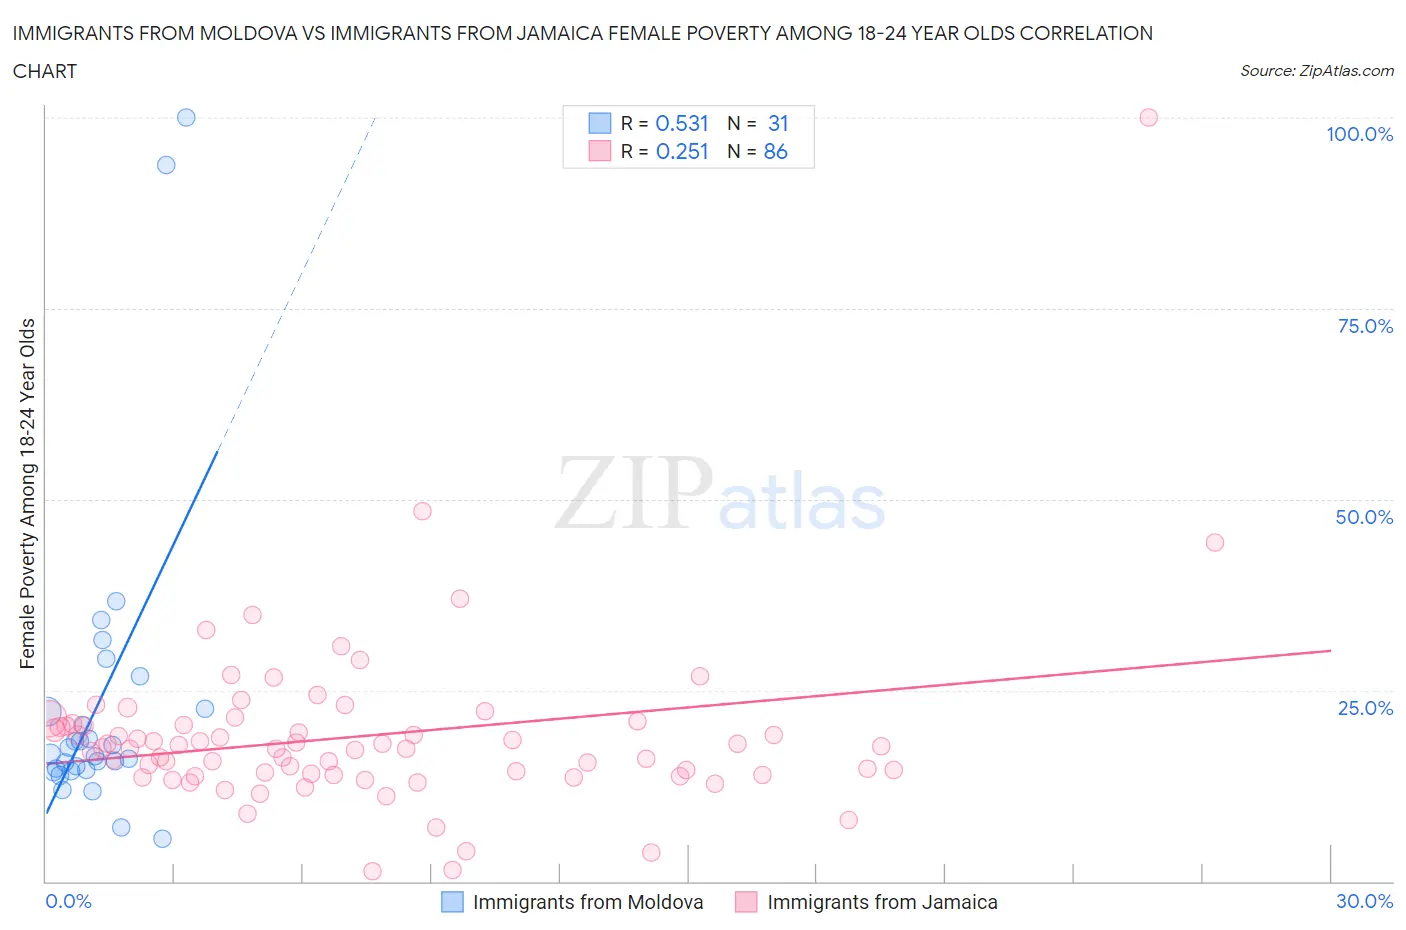 Immigrants from Moldova vs Immigrants from Jamaica Female Poverty Among 18-24 Year Olds